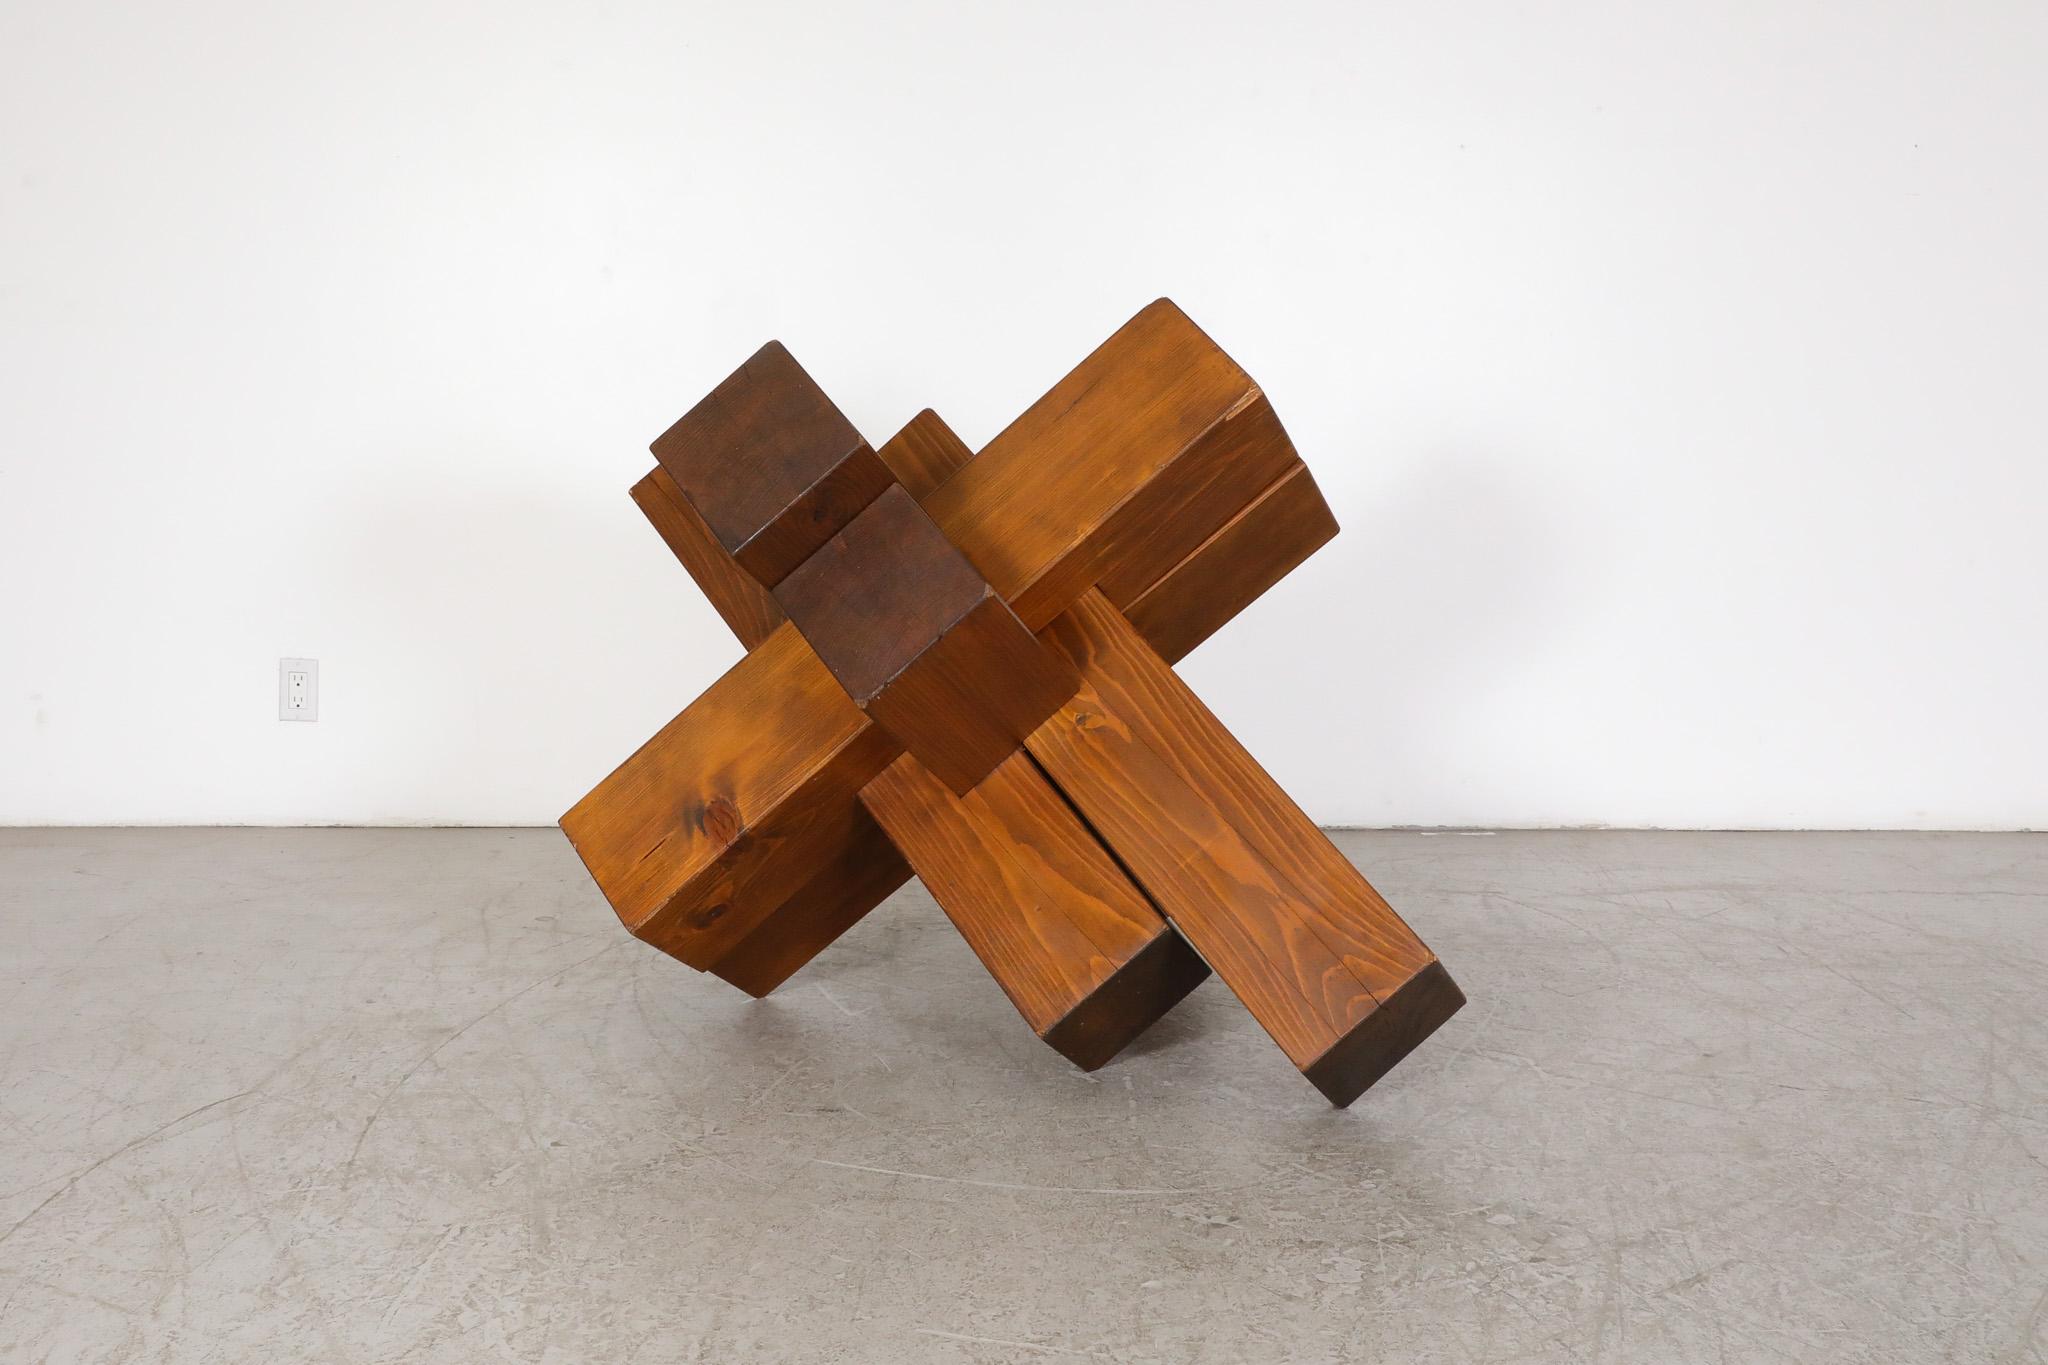 Large 1960's French cubist abstract sculpture with interlocking solid walnut wooden beams. This Mid-Century sculpture can be place on any side and the beams can be slightly adjusted, sliding from side to side. A stunning piece from any angle. It is